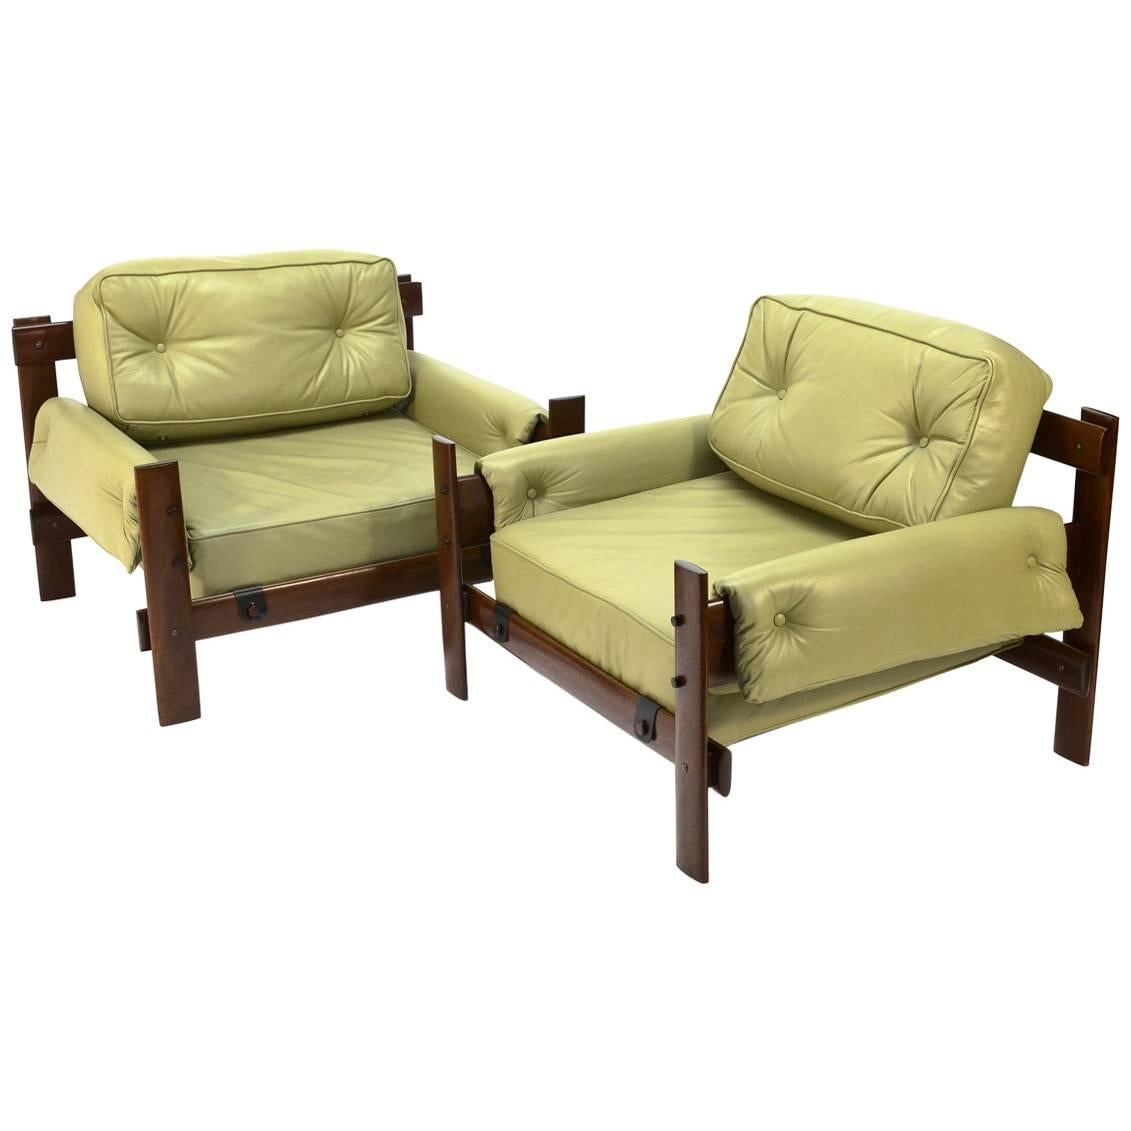 Pair of Brazilian Leather Lounge Chairs by Percival Lafer